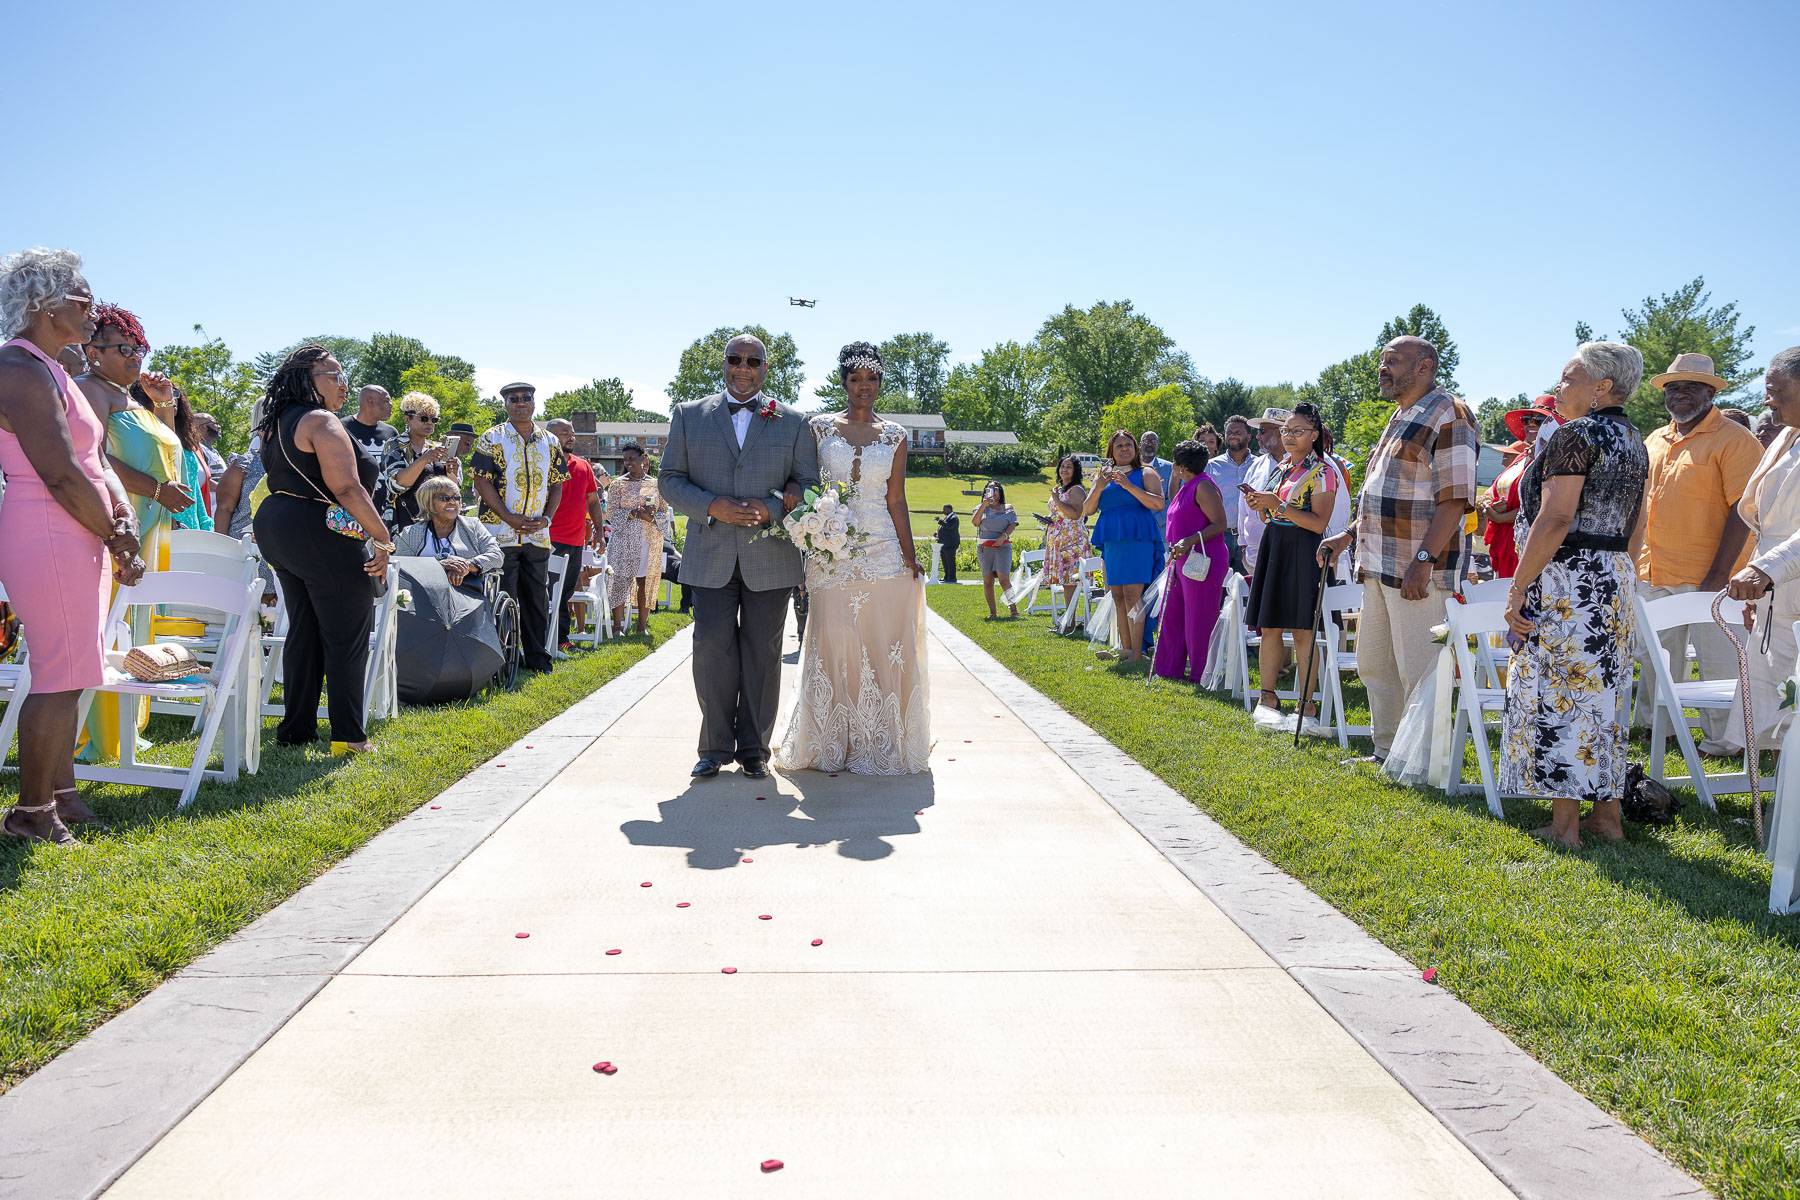 The bride walking on a large white carpet